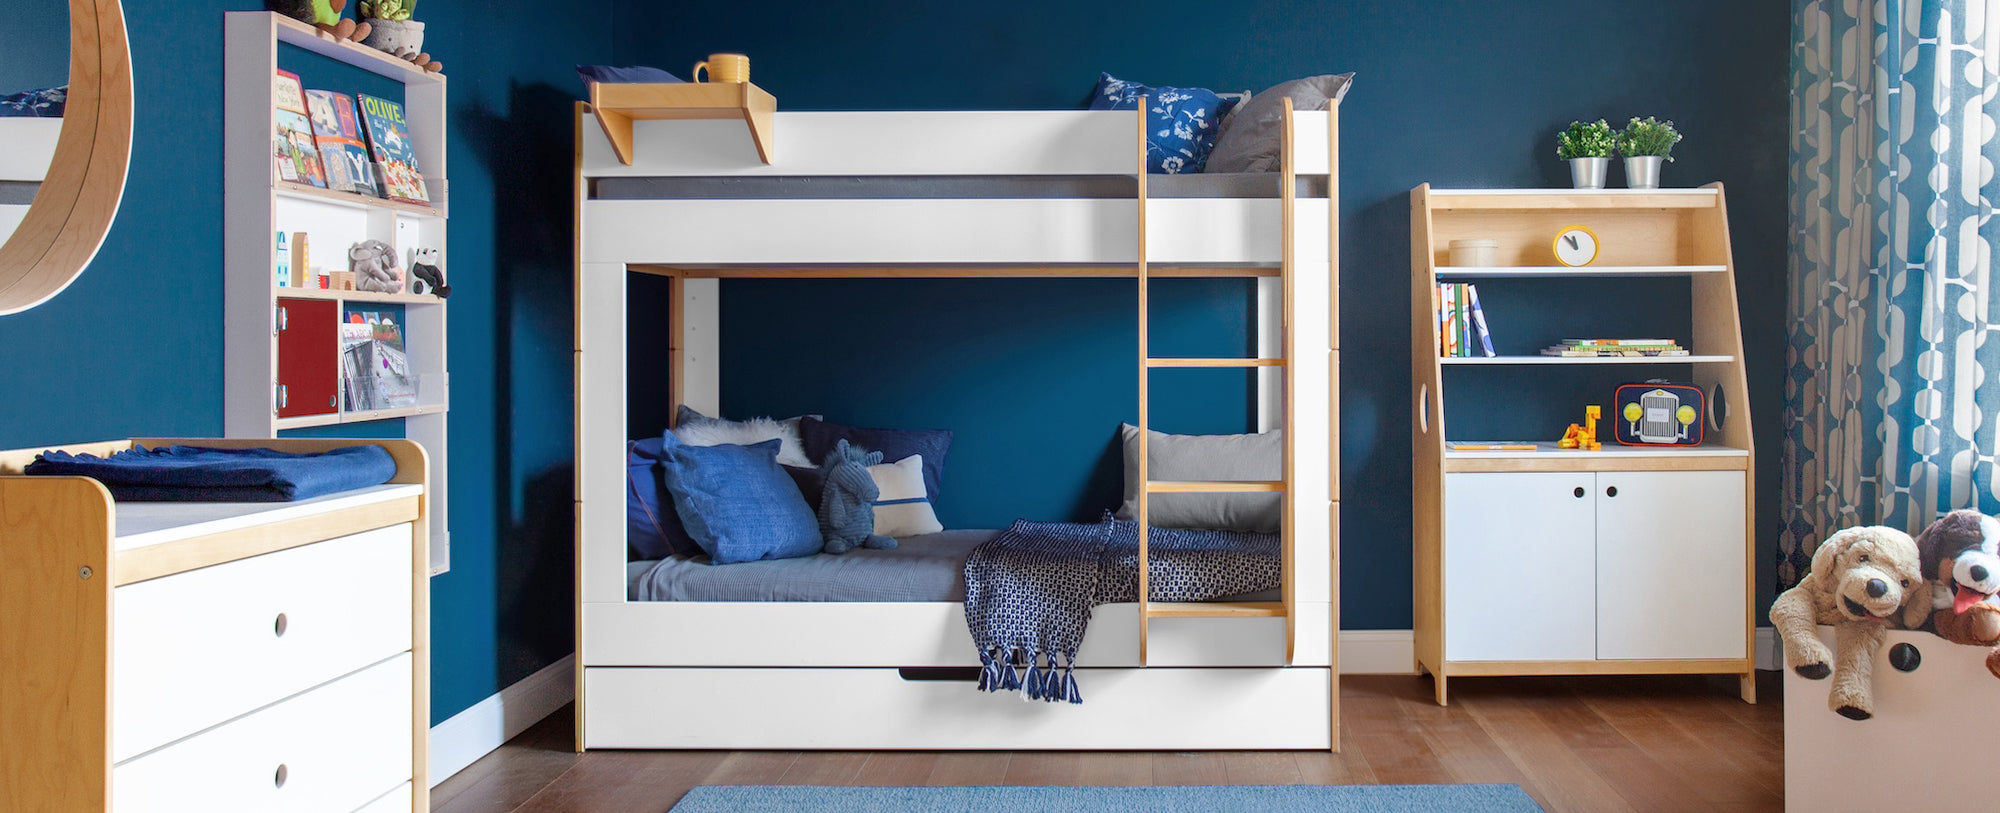 Cozy children's bedroom with a modern bunk bed, vibrant blue walls, and complementary storage units